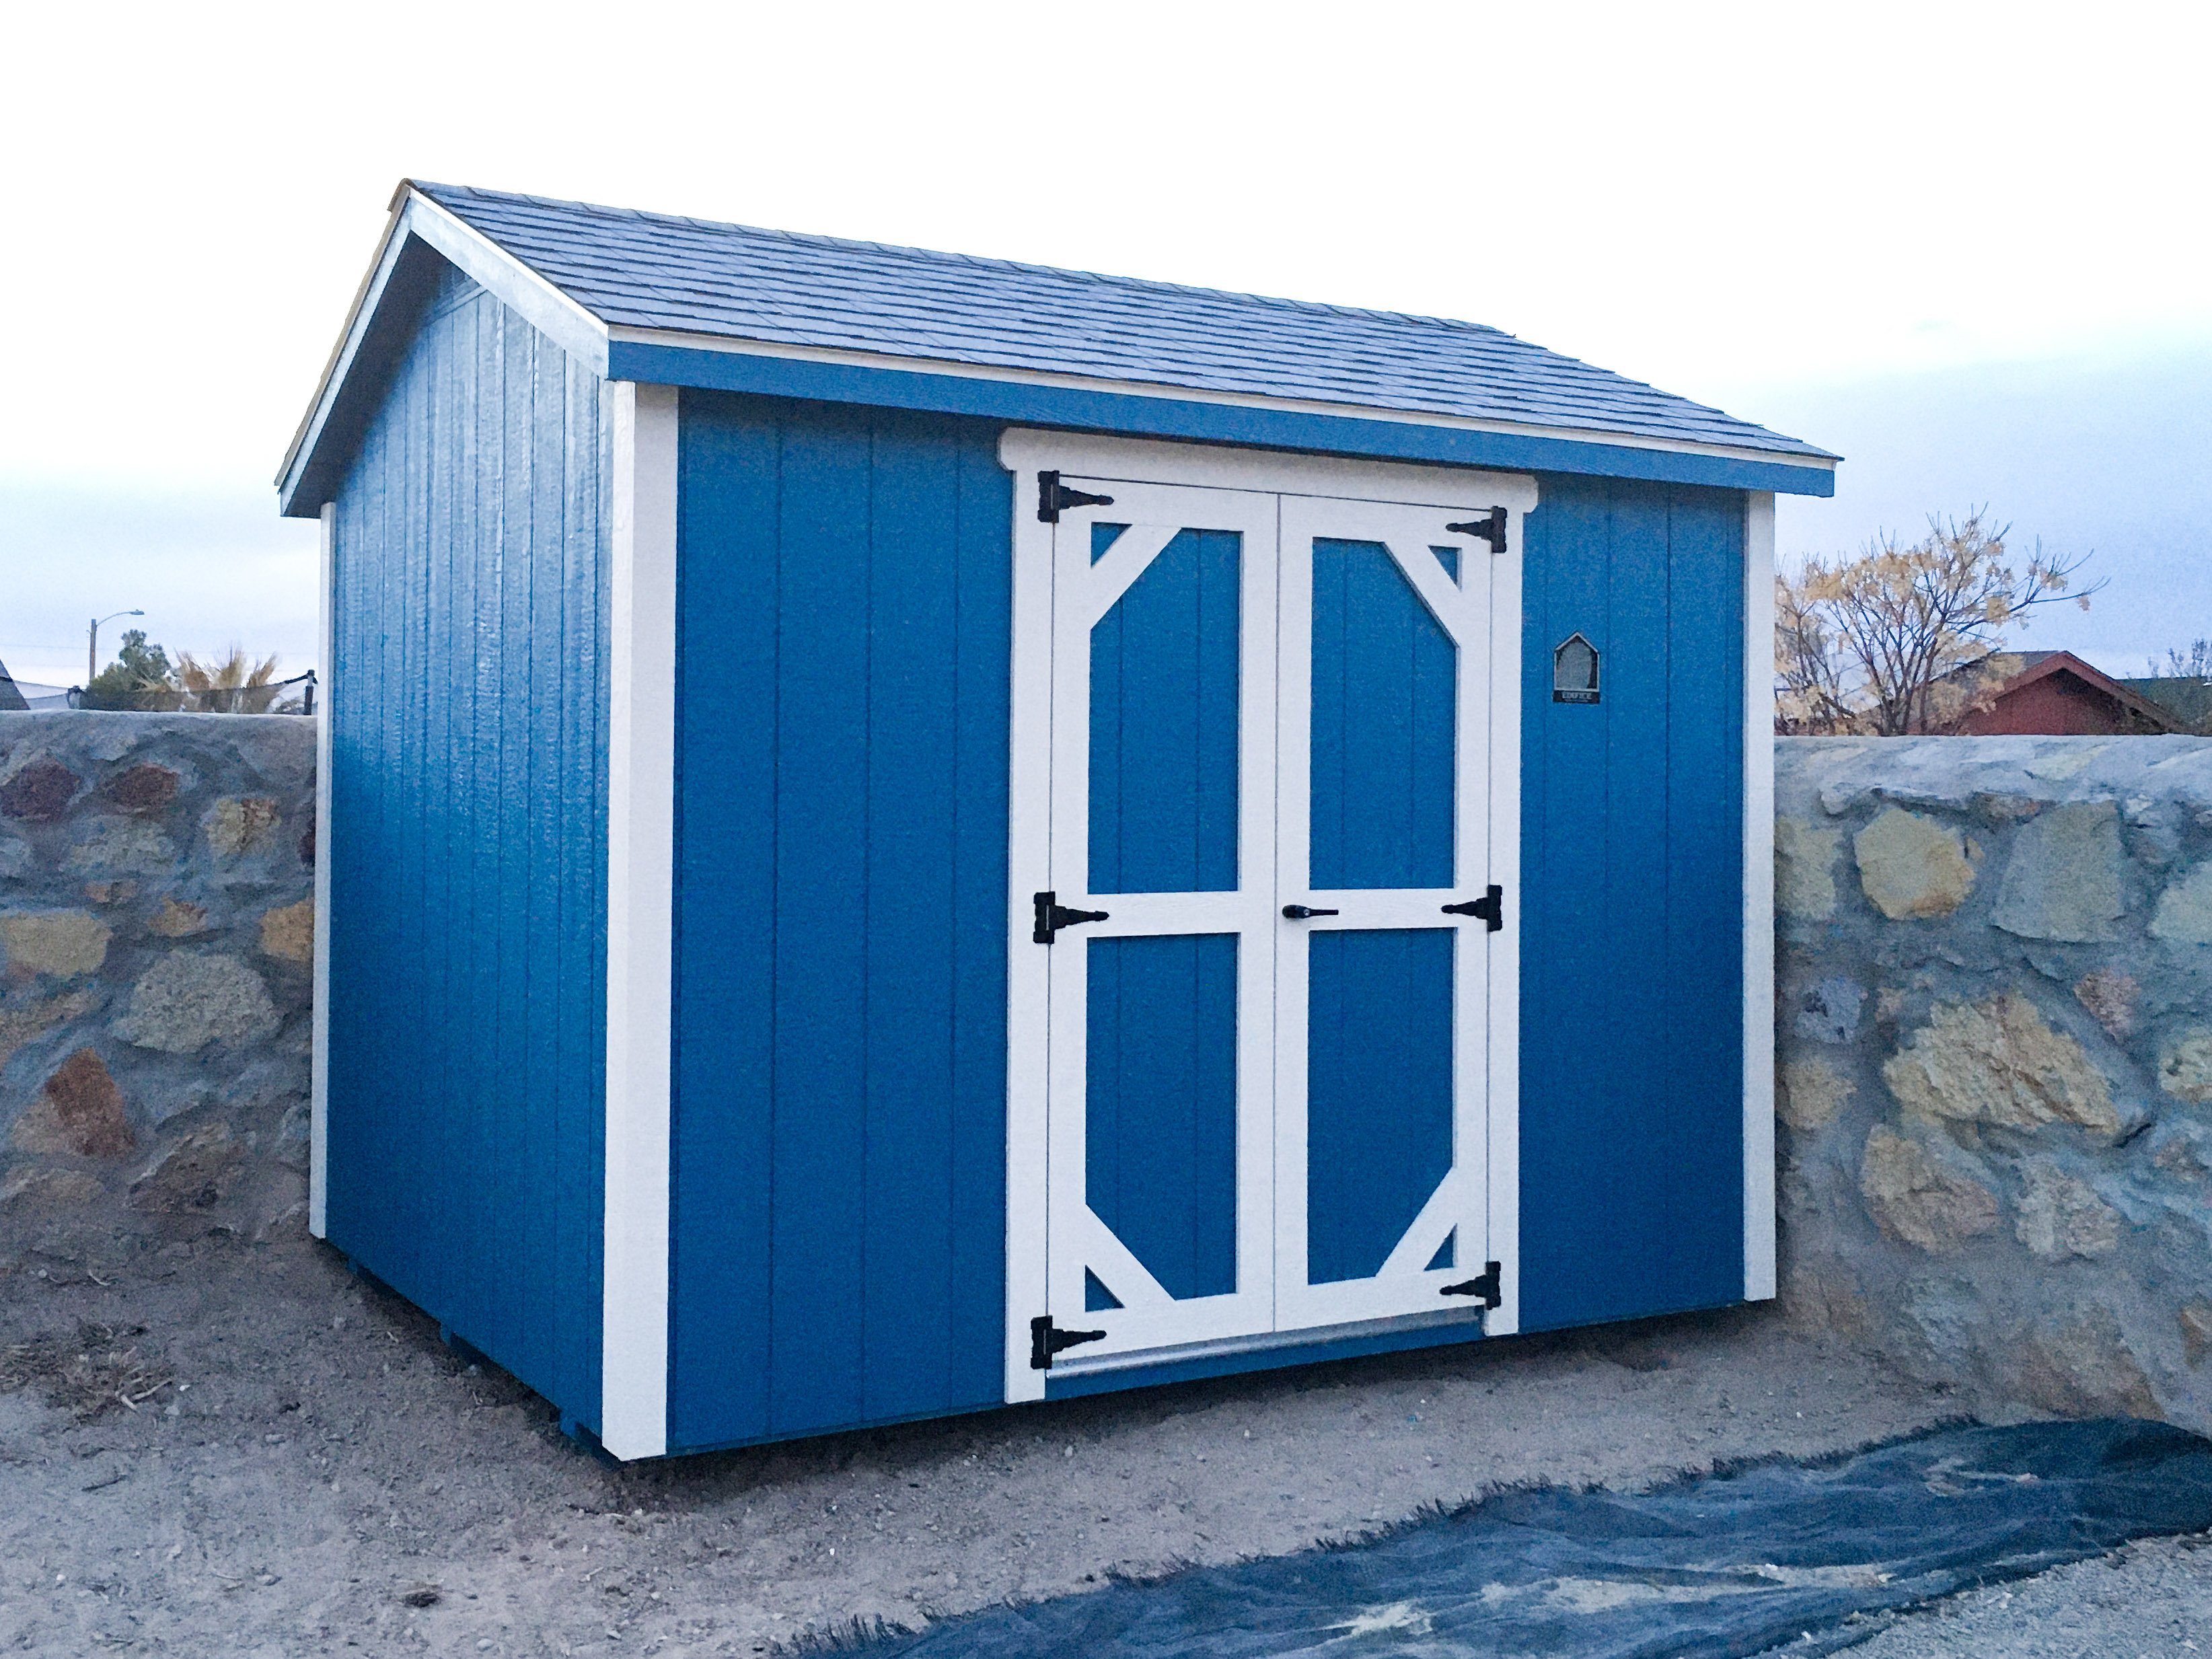 Outdoor Storage Sheds For Sale in Deming, NM - Edifice, Inc